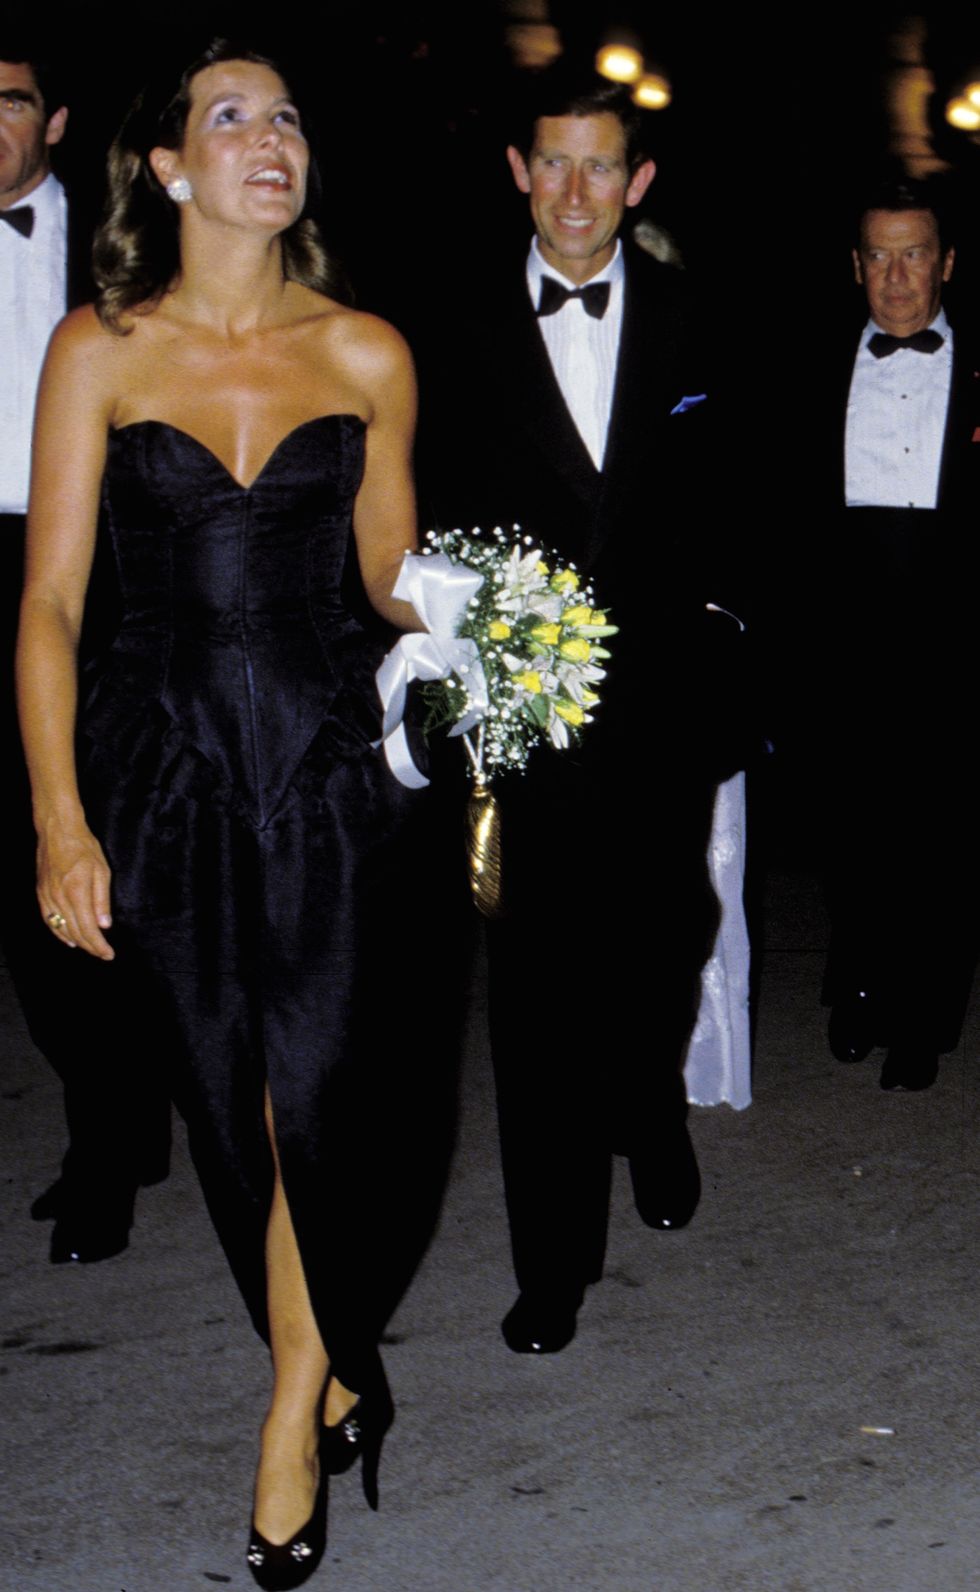 monaco 3 august 1984, princess caroline of monaco attends an opera at the opera of monaco in the presence of prince charles,    photo by francis apesteguygetty images